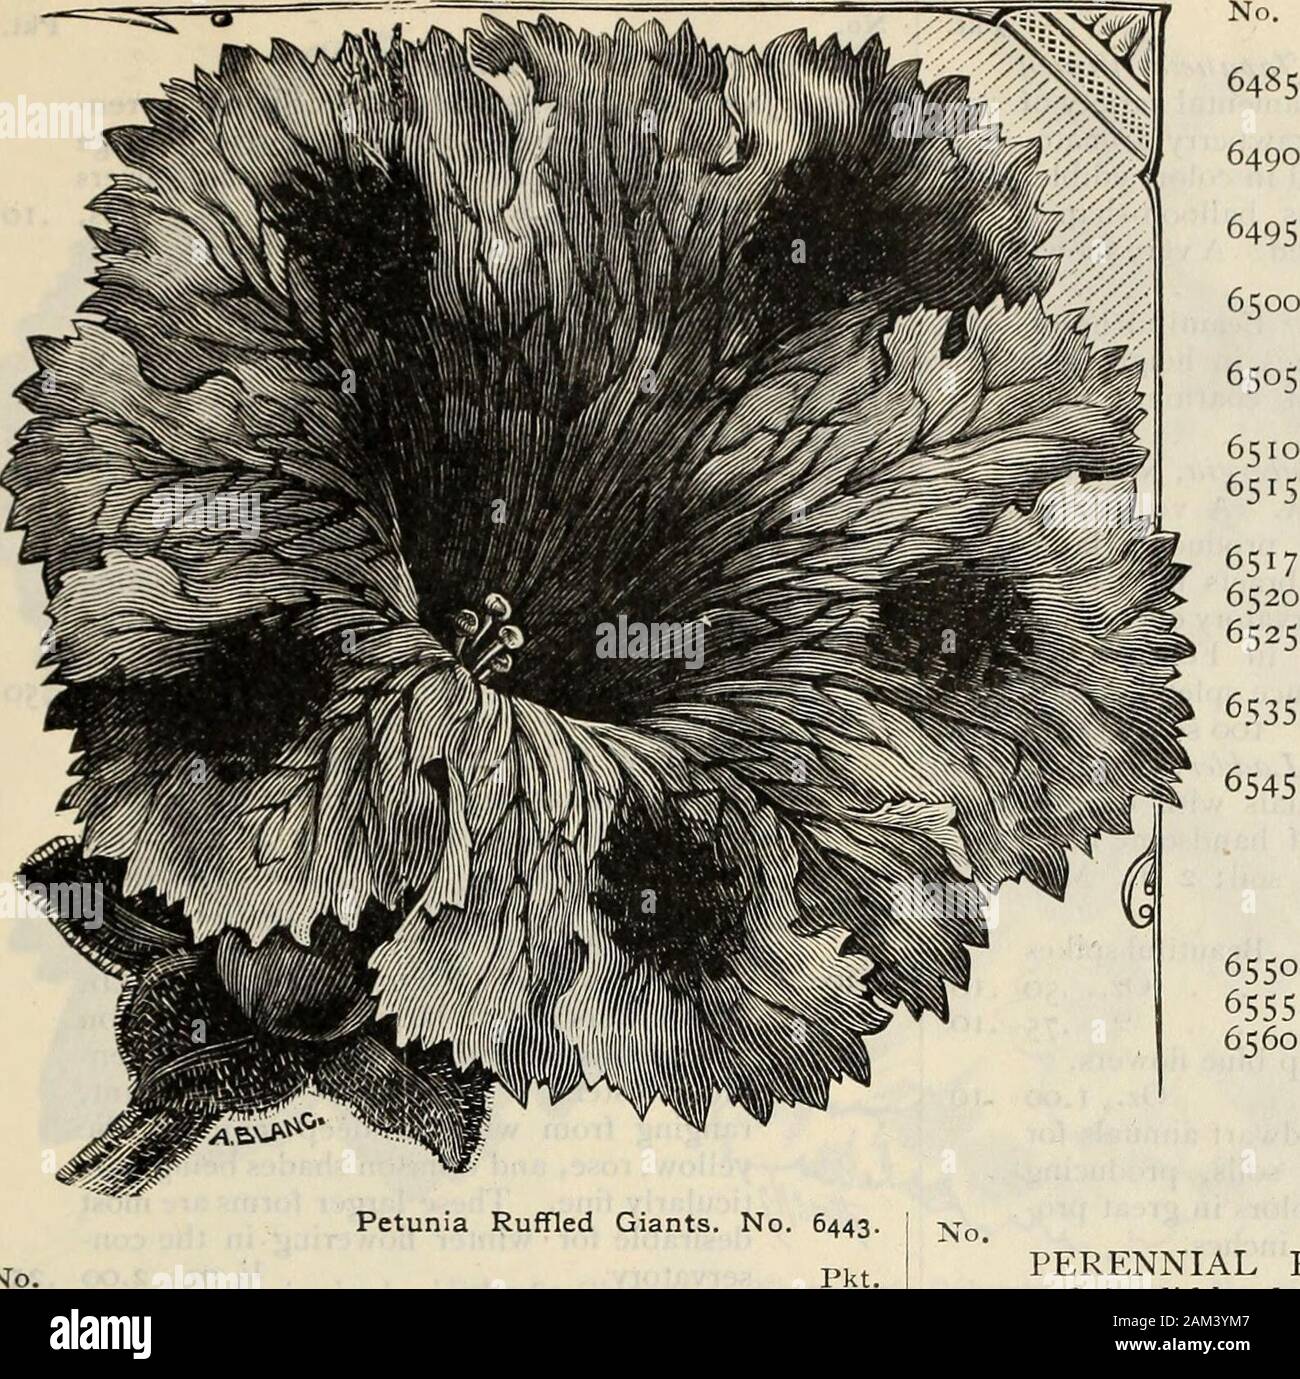 Farquhar's catalogue : spring 1904 . uc-ing flowers of medium size in great vari-ety of colors. Very free-blooming and ex-cellent for beds and masses . Oz., 1.50 .10Fine Mixed. Choice colors . .75 .05Striped and Blotched. Very effectivestrain for beds and borders; flowers beau-tifully striped and mottled . Oz., 2.00 .10 Crimson .75 .05 White 1.00 .05 NANA COMPACTA MULTIFLORA. InimitableDwarf. The flowers are beautifully stripedand they completely cover the compactlittle plants. This variety is most usefulfor edgings and for early blooming in pots; 6 inches % oz., 1.00 .25 GIANT OR GRANDIFLORA. Stock Photo